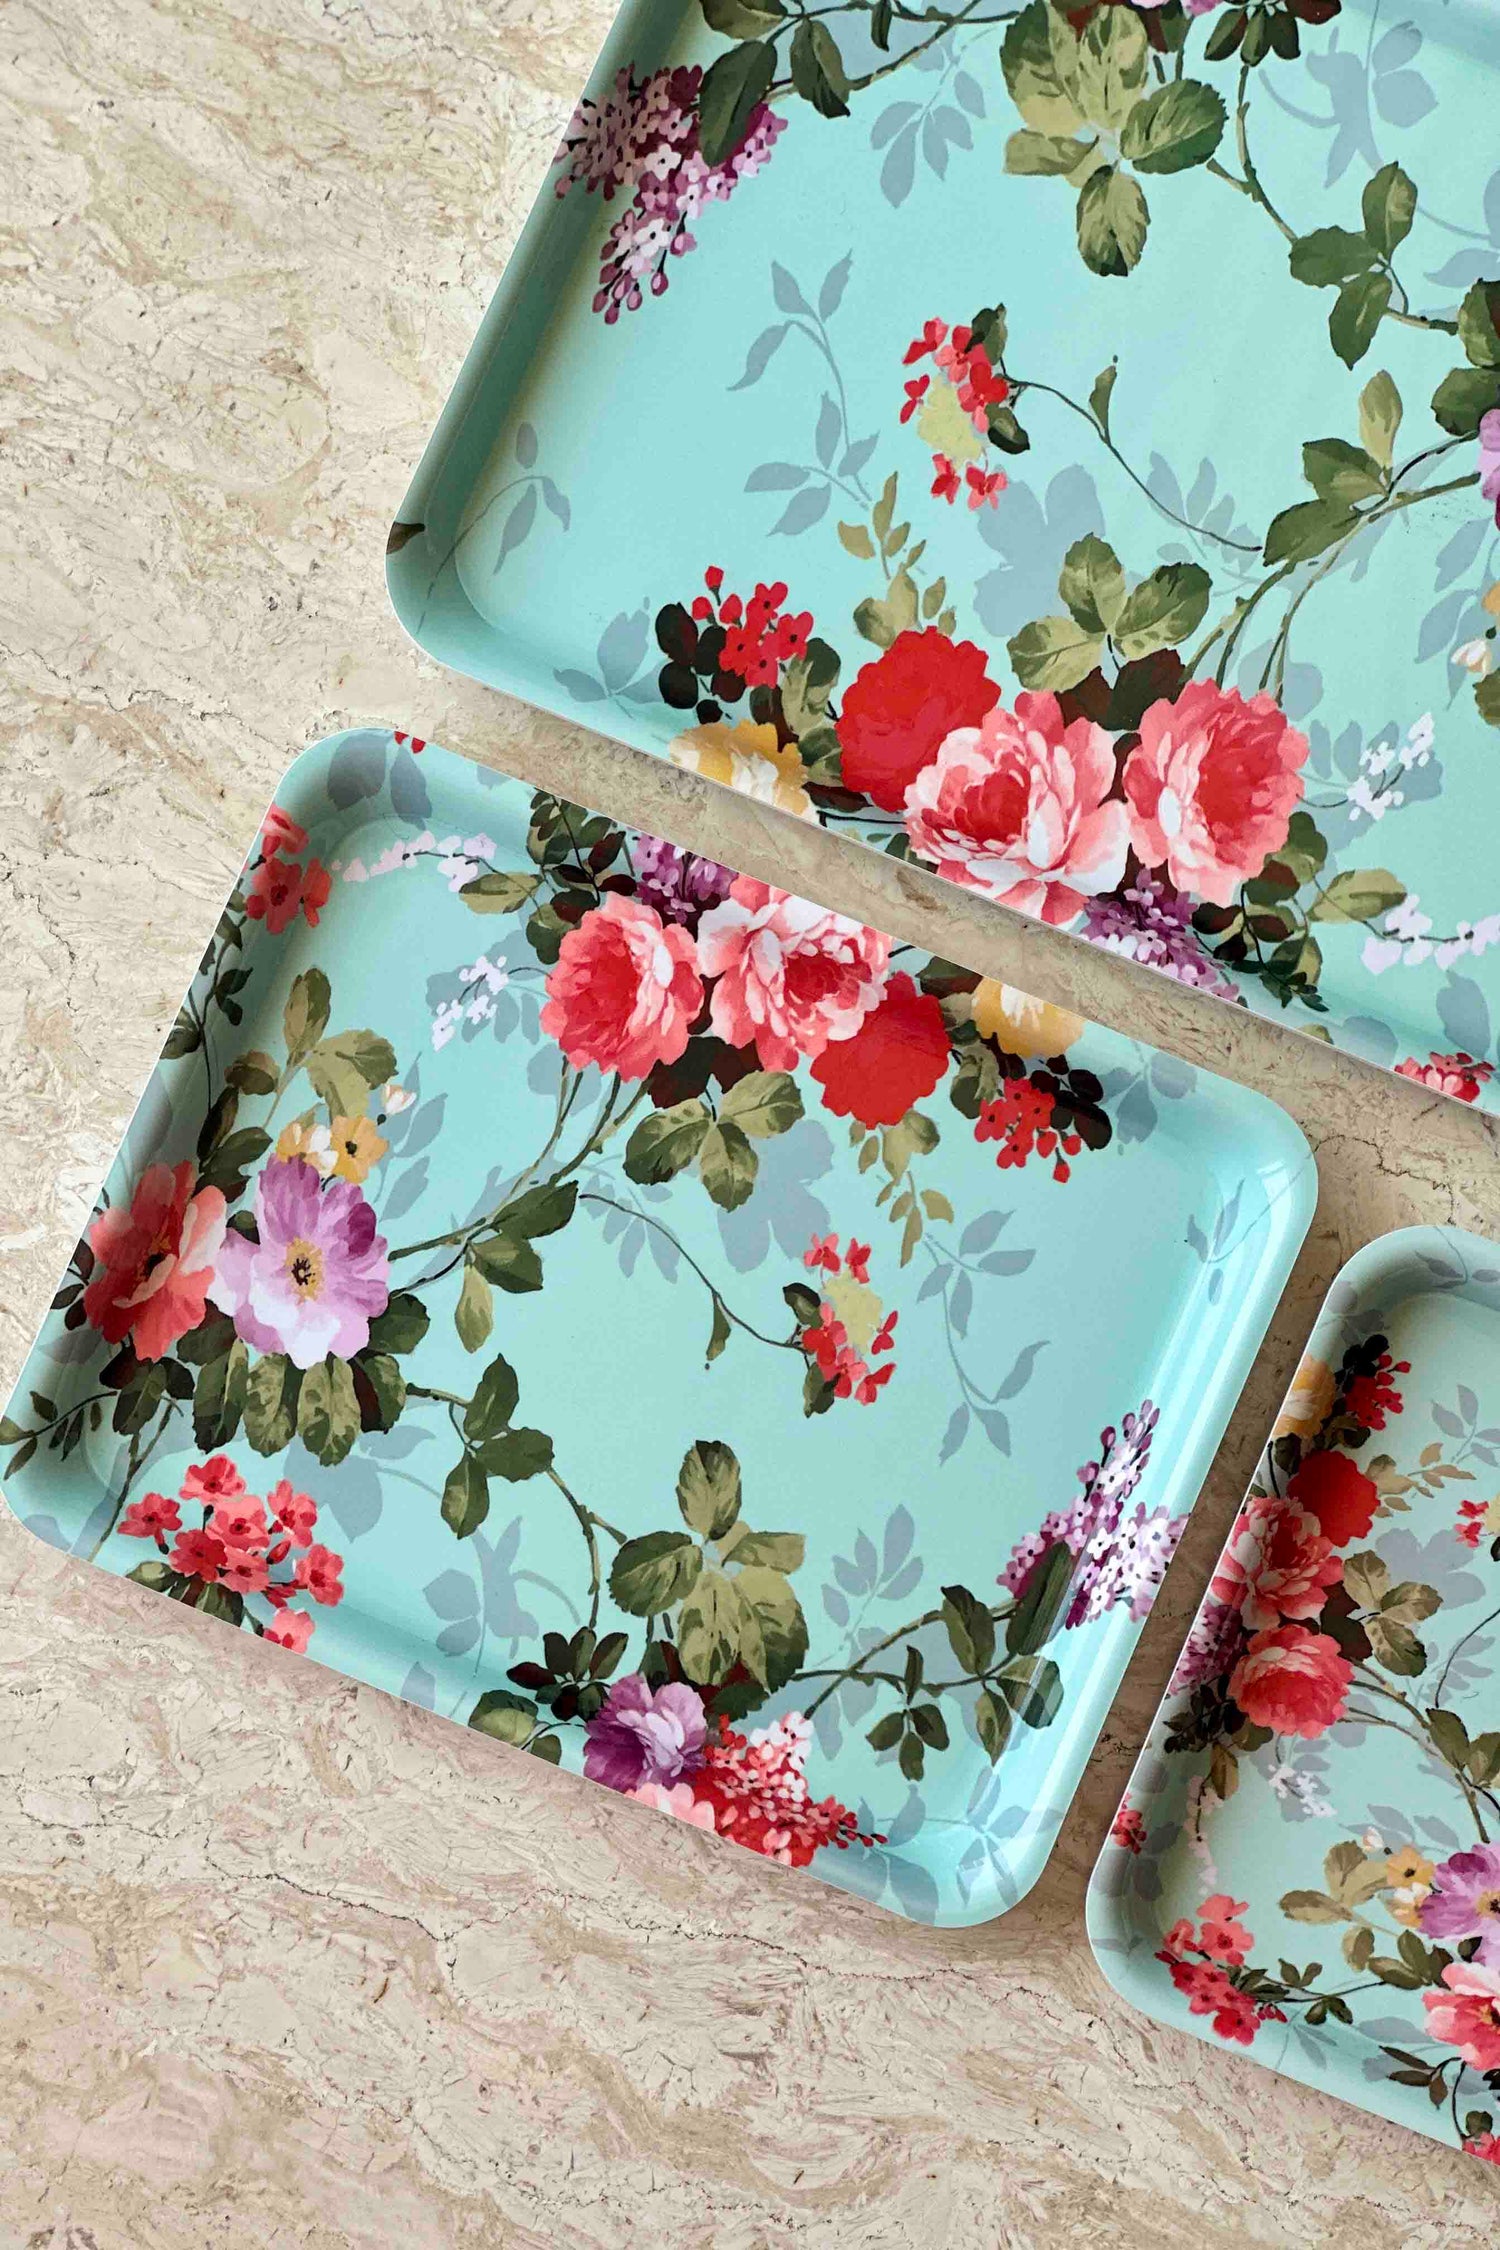 Mint Green Floral Acrylic Serving Tray - Set Of 5